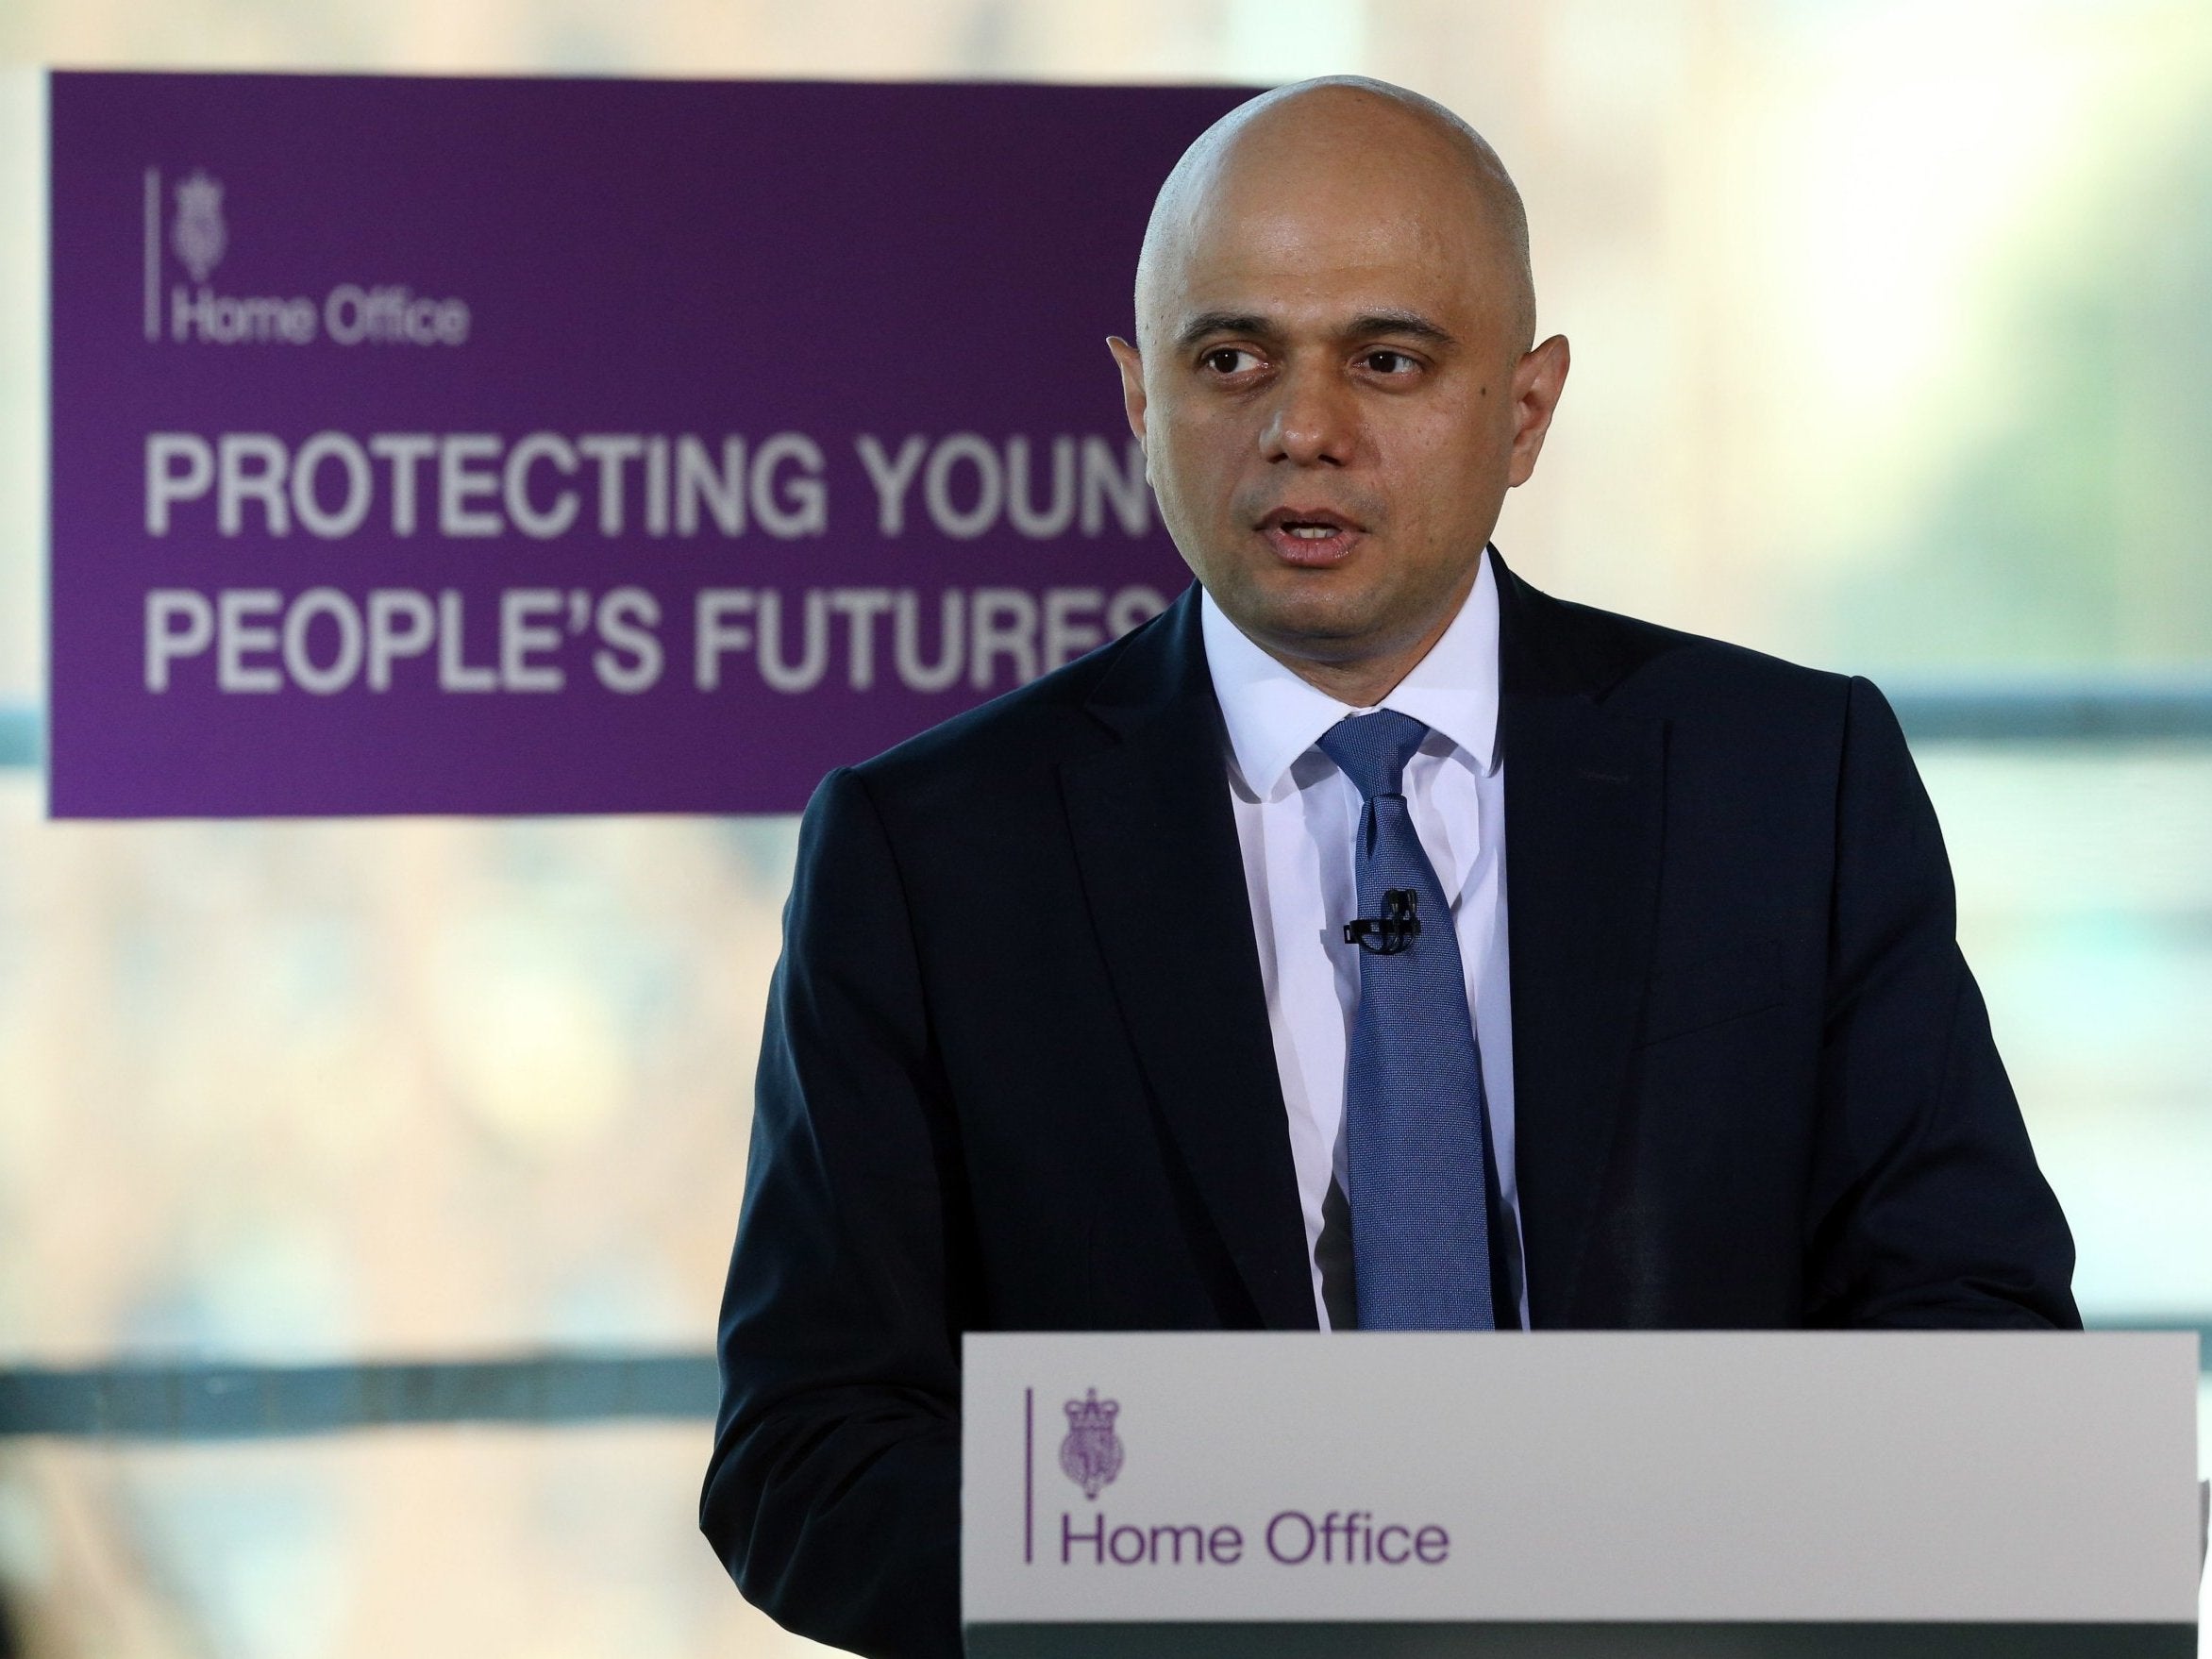 Home secretary Sajid Javid said the government needs to "look again" at how much is revealed about people who have committed certain crimes.